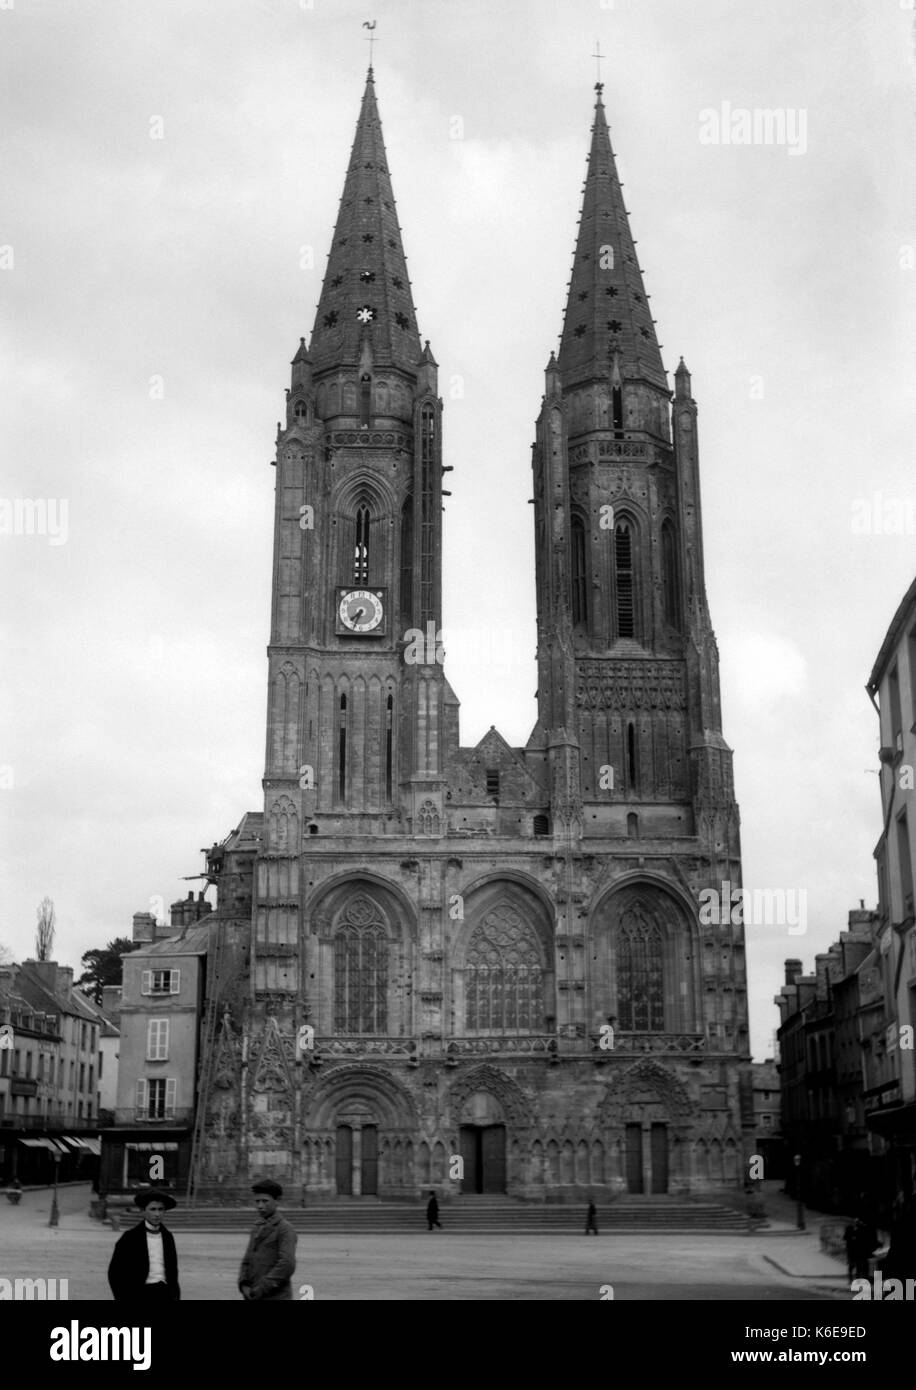 AJAXNETPHOTO. 1891-1910 (APPROX). SAINT-LO, NORMANDY.FRANCE. - EGLISE NOTRE DAME DE SAINT-LO. CHURCH OF OUR LADY. 50% DESTROYED BY ALLIED BOMBING IN BATTLE OF NORMANDY 1944.A GOTHIC STYLE CHURCH WITH TWIN SPIRES IN A TOWN SQUARE WITH TWO BOYS, ONE WEARING A BASQUE OR BRETON STYLE BERET. PHOTOGRAPHER:UNKNOWN © DIGITAL IMAGE COPYRIGHT AJAX VINTAGE PICTURE LIBRARY SOURCE: AJAX VINTAGE PICTURE LIBRARY COLLECTION REF:AVL FRA 1890 02 Stock Photo